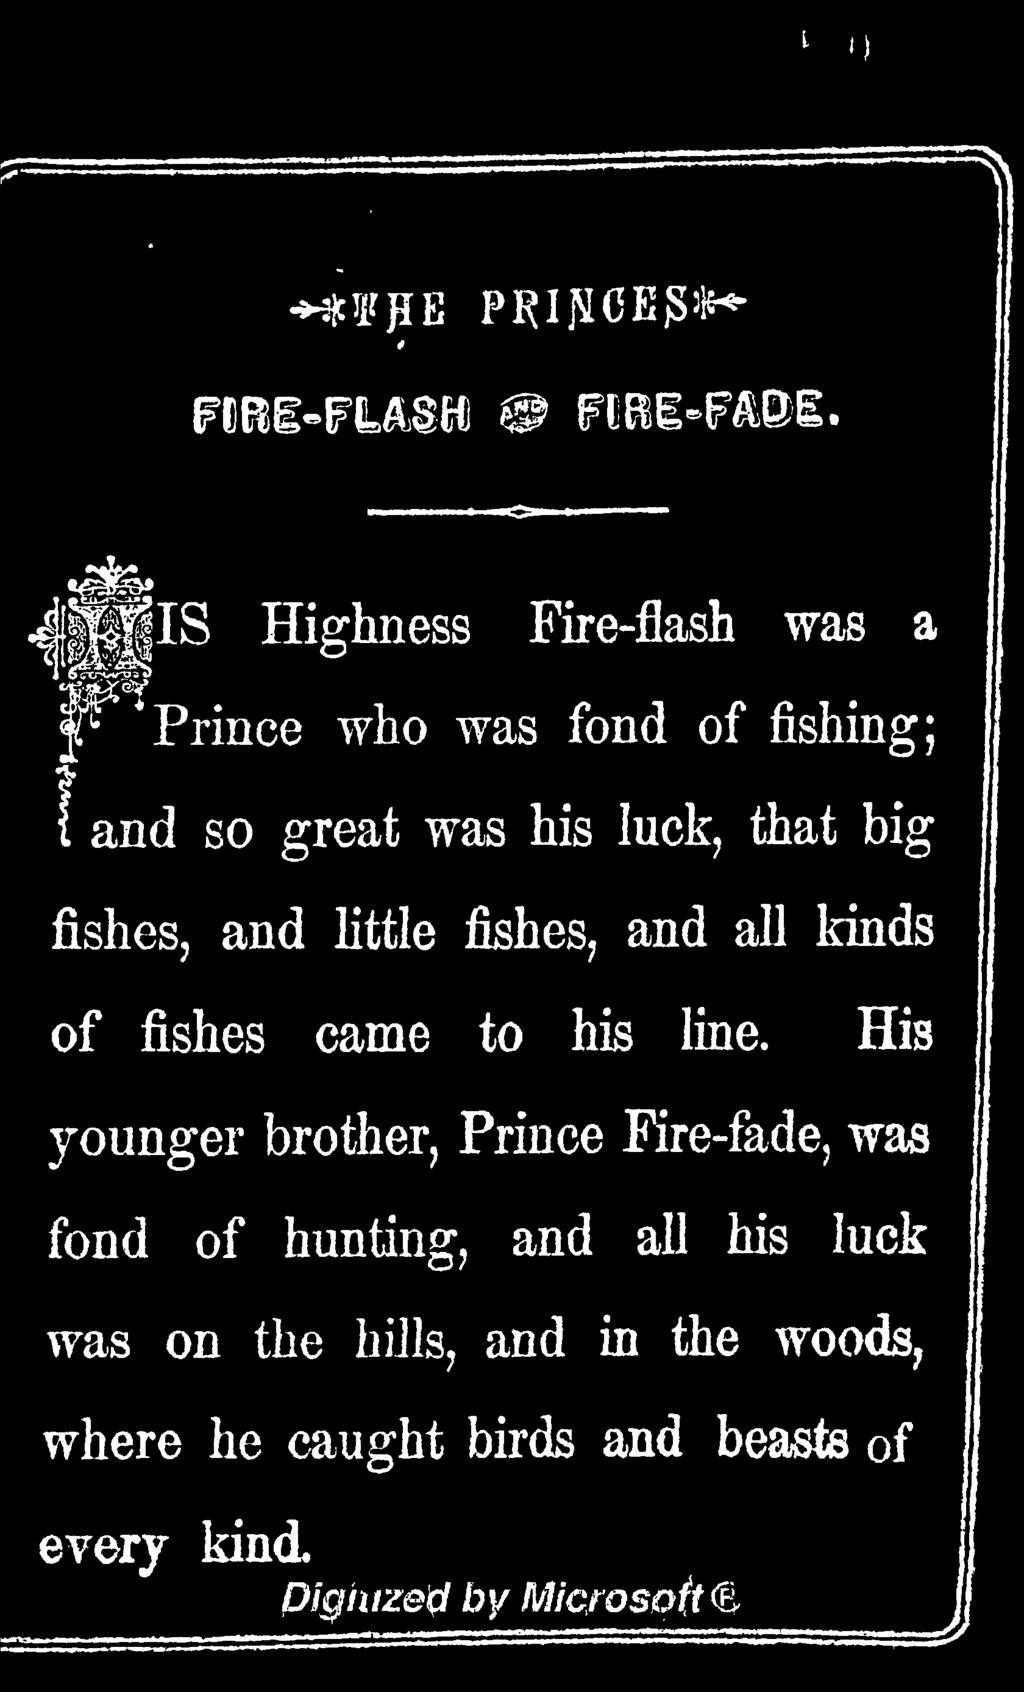 His younger brother, Prince Fire-fade, was fond of